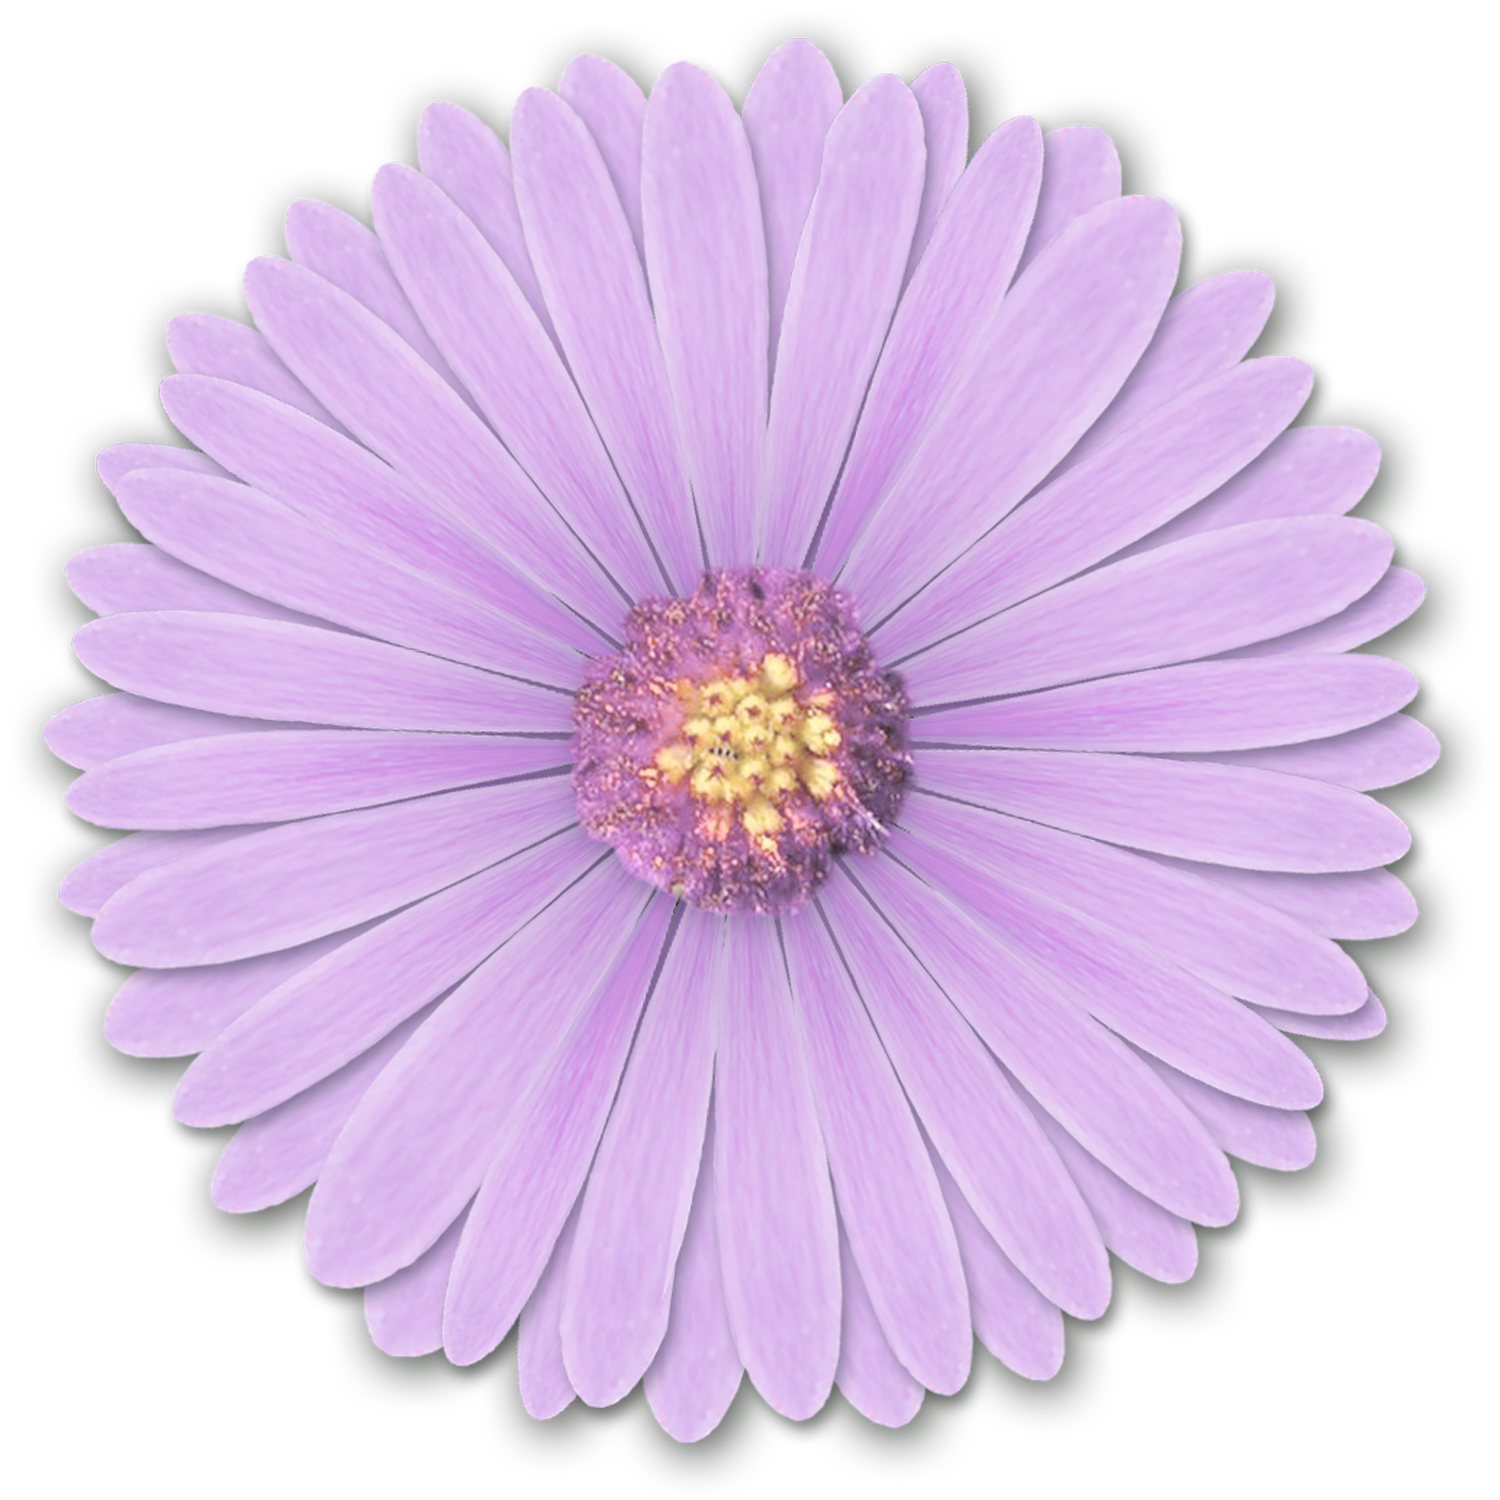 Purple Flower PNG, Purple Flower Transparent Background - FreeIconsPNG